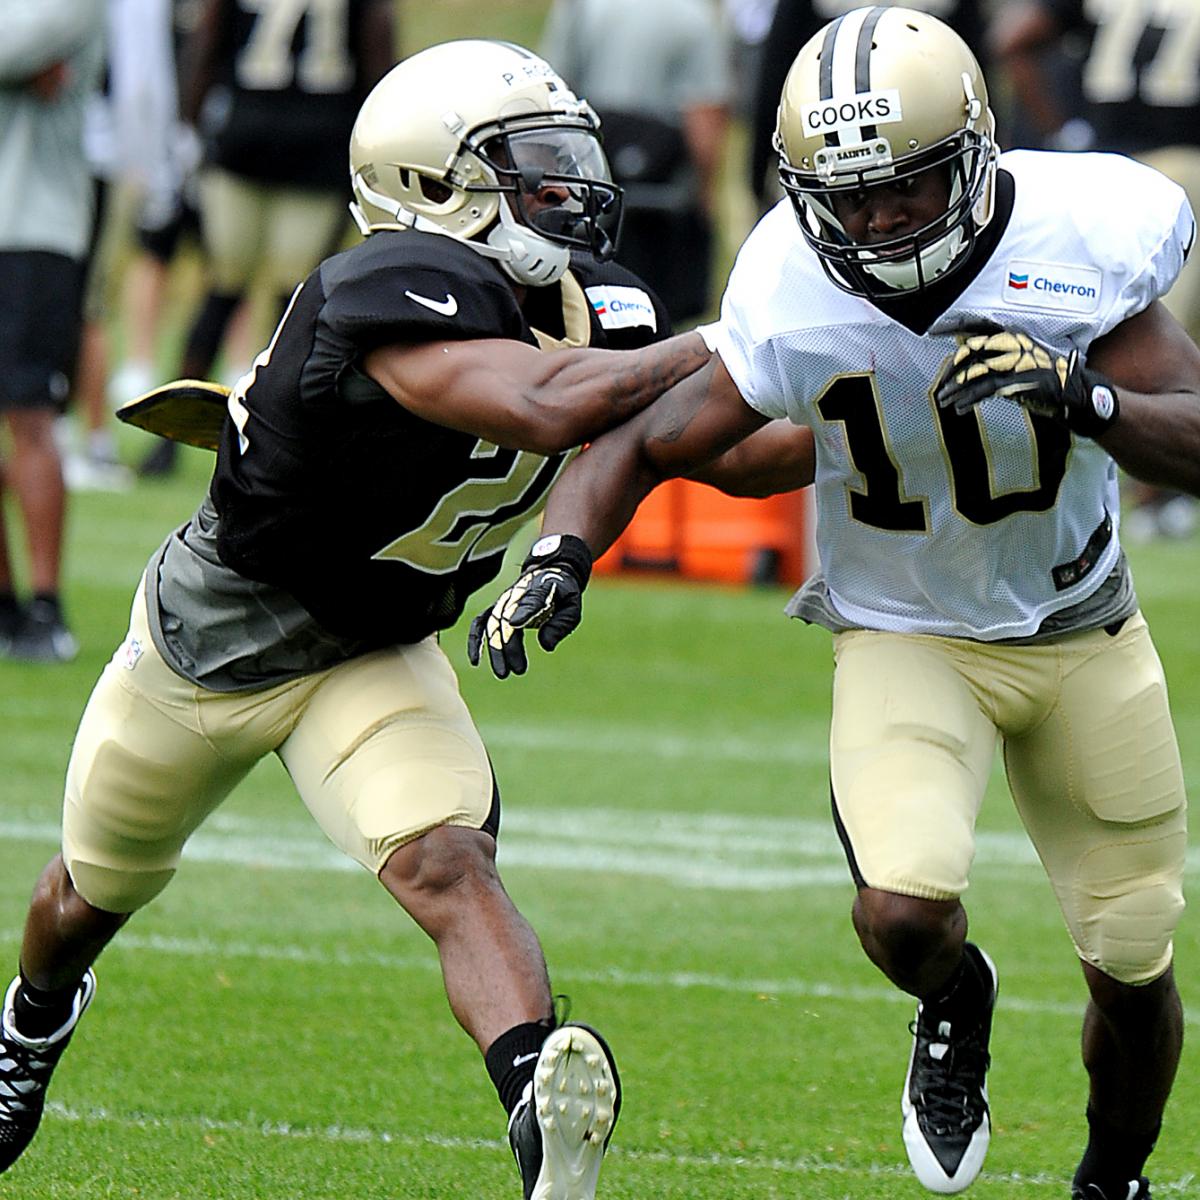 Fantasy Football 2014: Top Sleepers at Every Skill Position